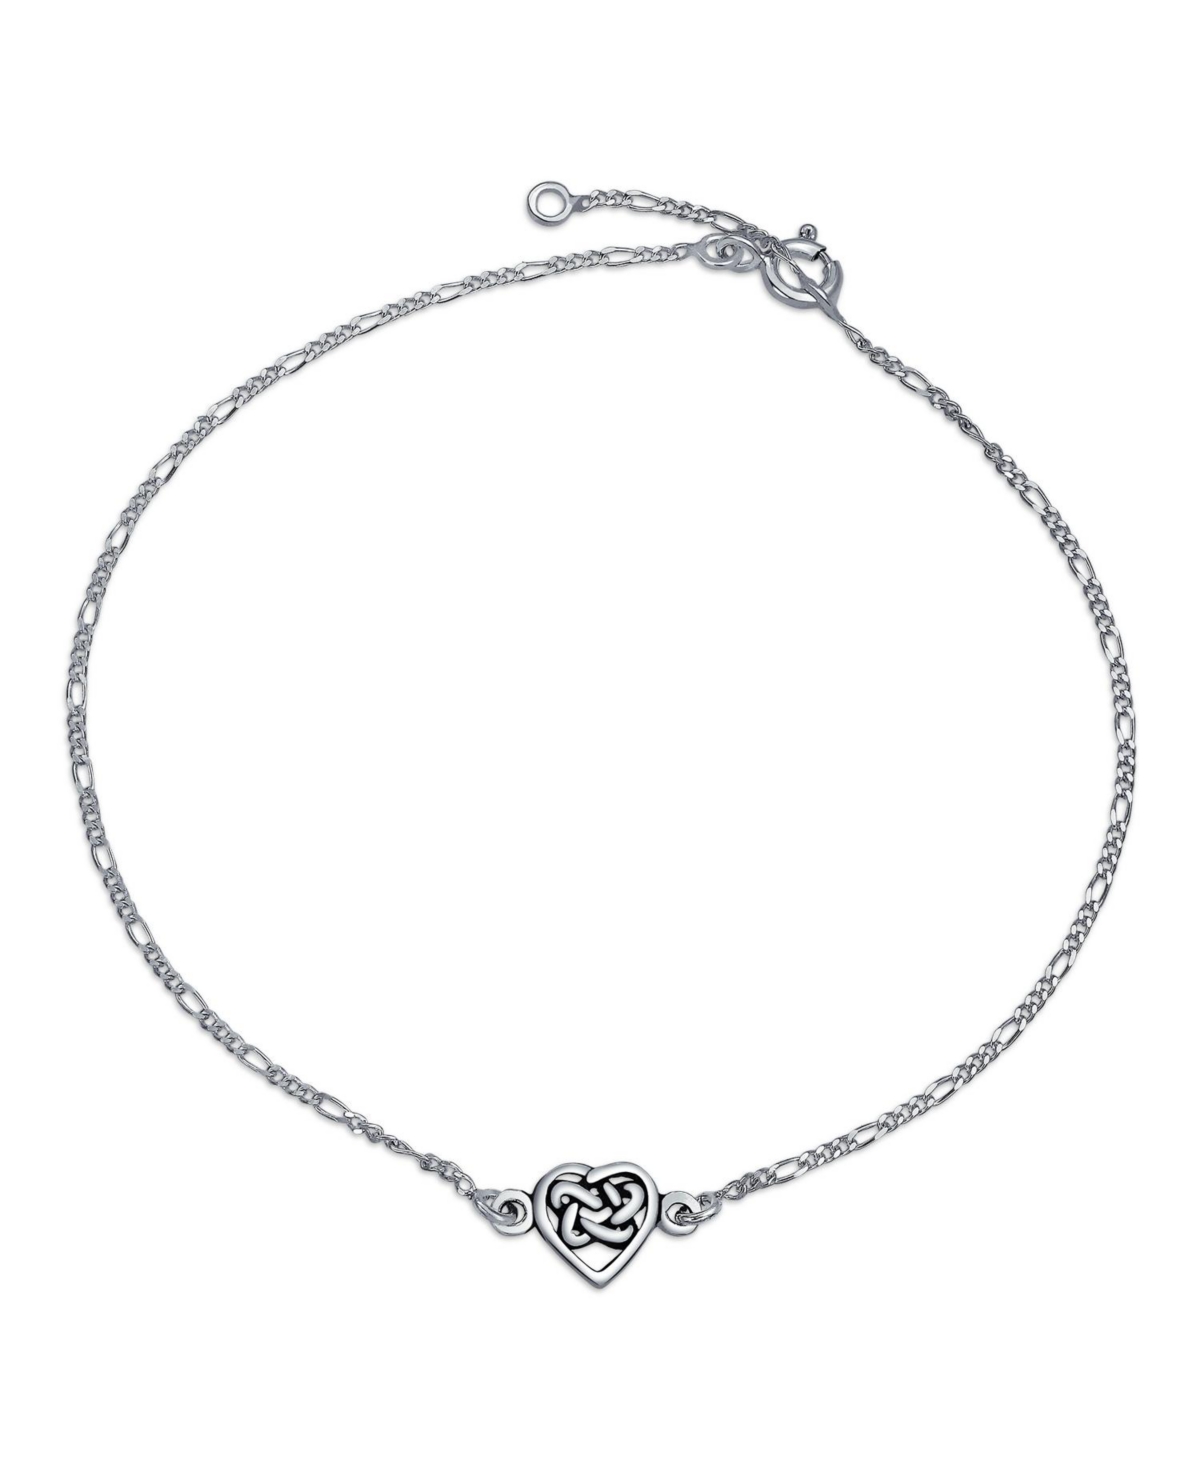 Love Knot Heart Shape Celtic Triquetra Anklet Lucky Charm Figaro Link Ankle Bracelet Oxidized Sterling Silver Adjustable 9 To 10 Inch Wi